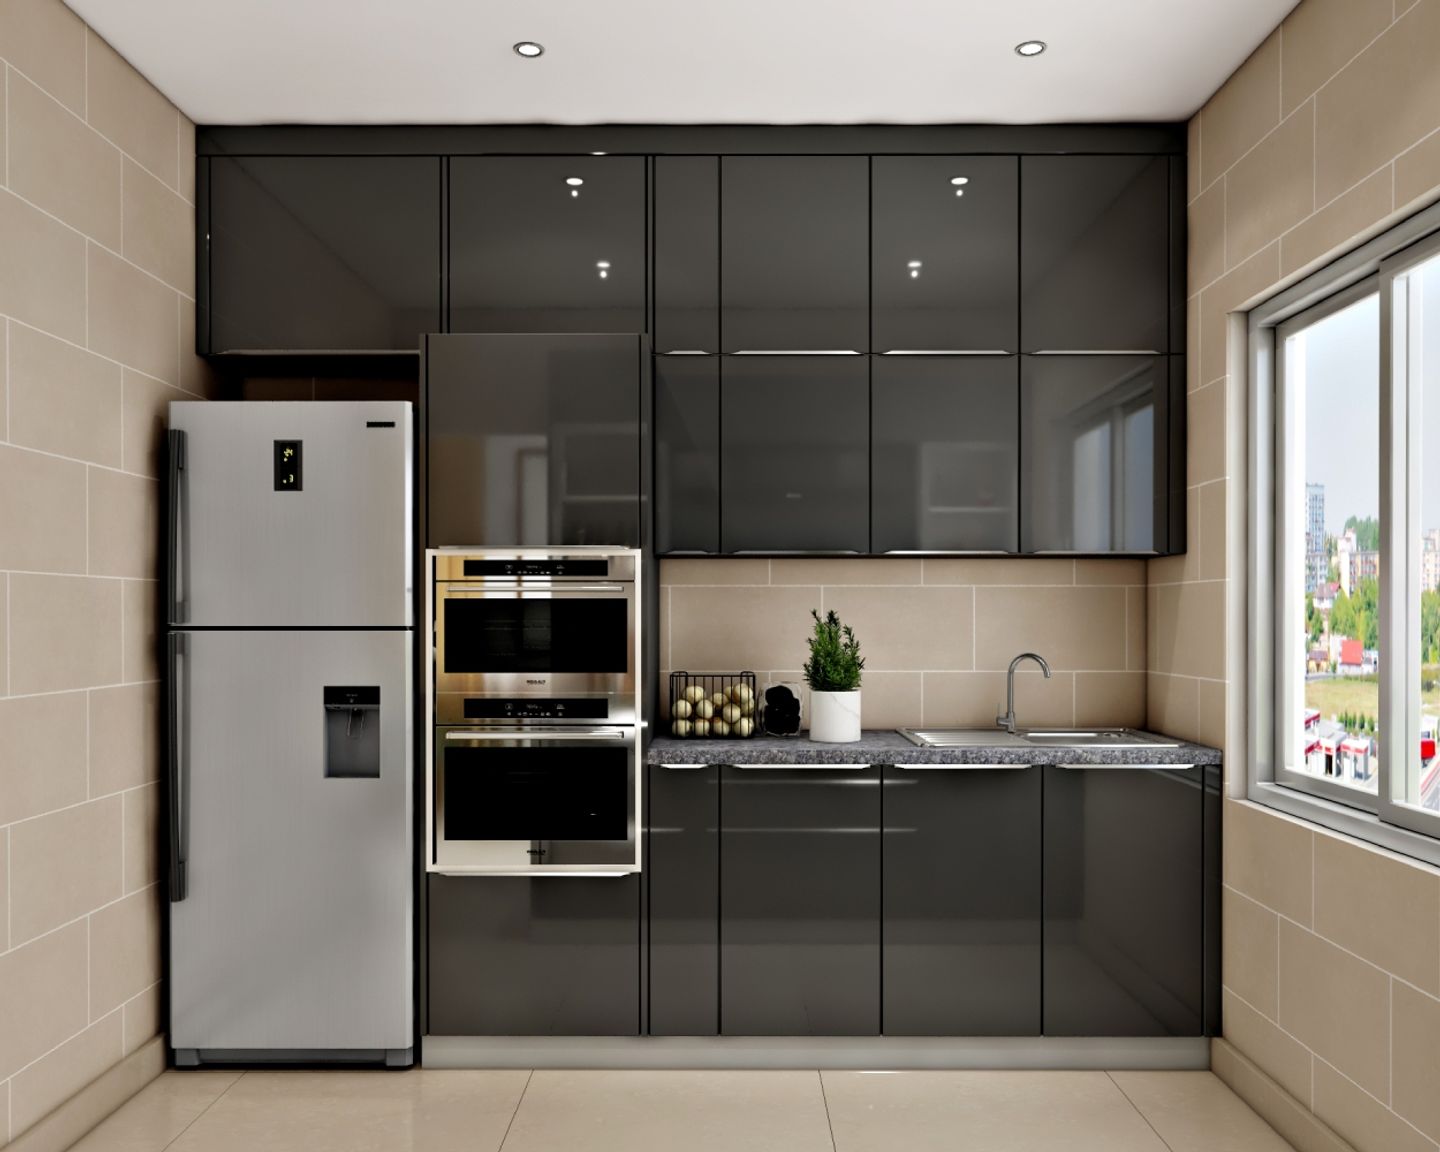 Dark Grey Indian Kitchen Cabinets With Glossy Finish And Tall Appliance Unit - Livspace